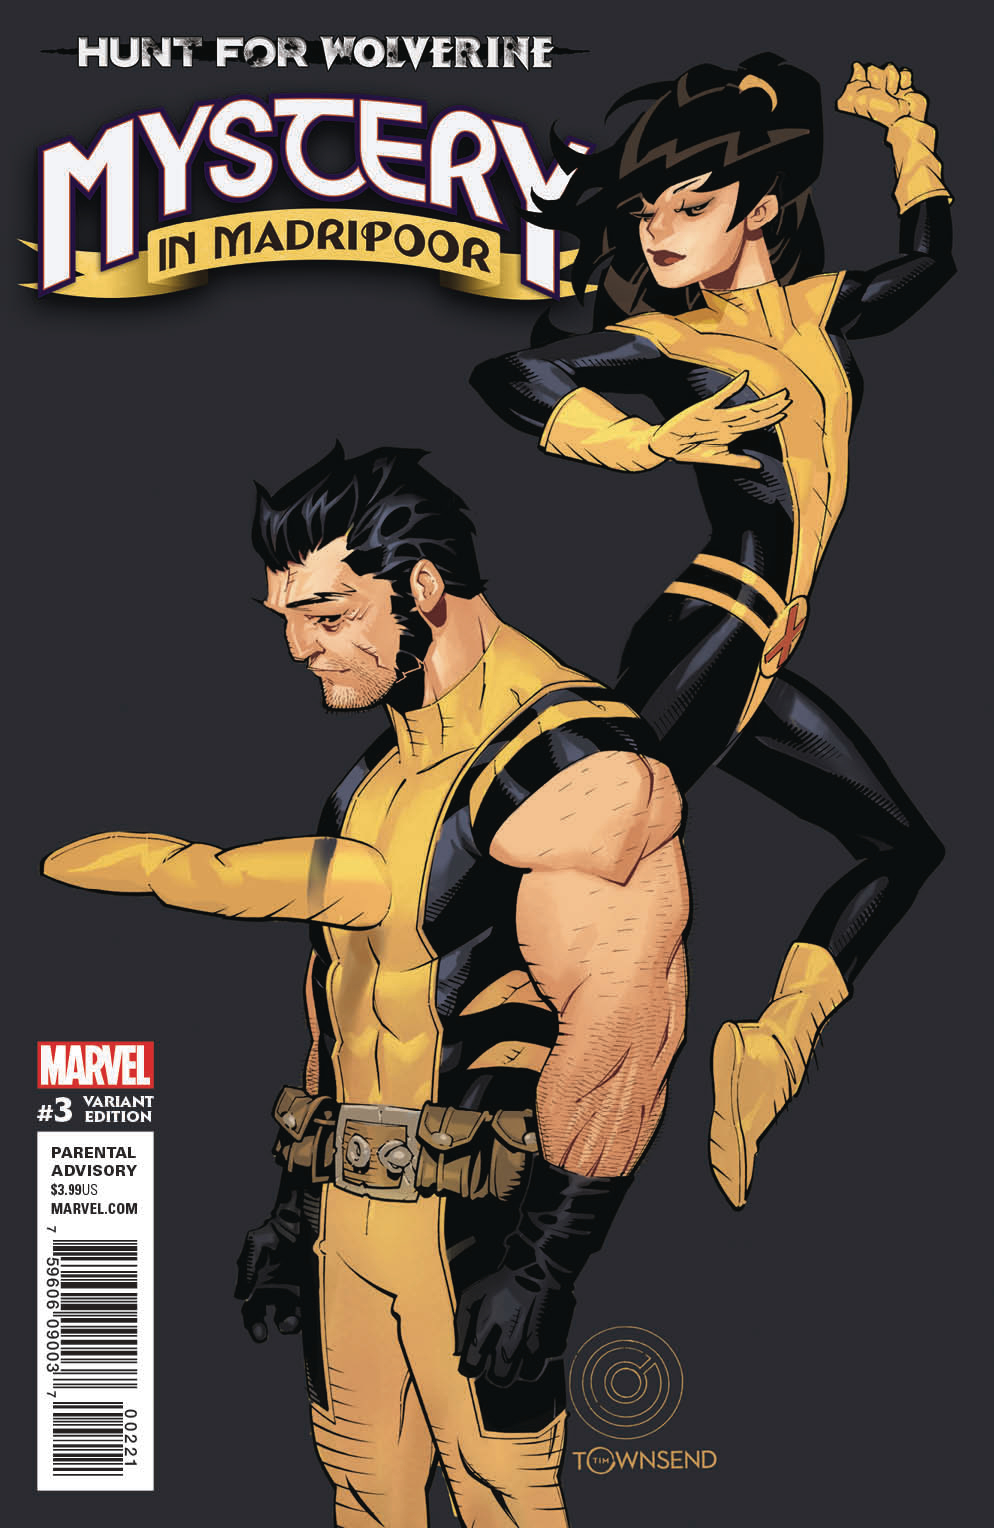 HUNT FOR WOLVERINE MYSTERY MADRIPOOR #3 (OF 4) BACHALO VAR